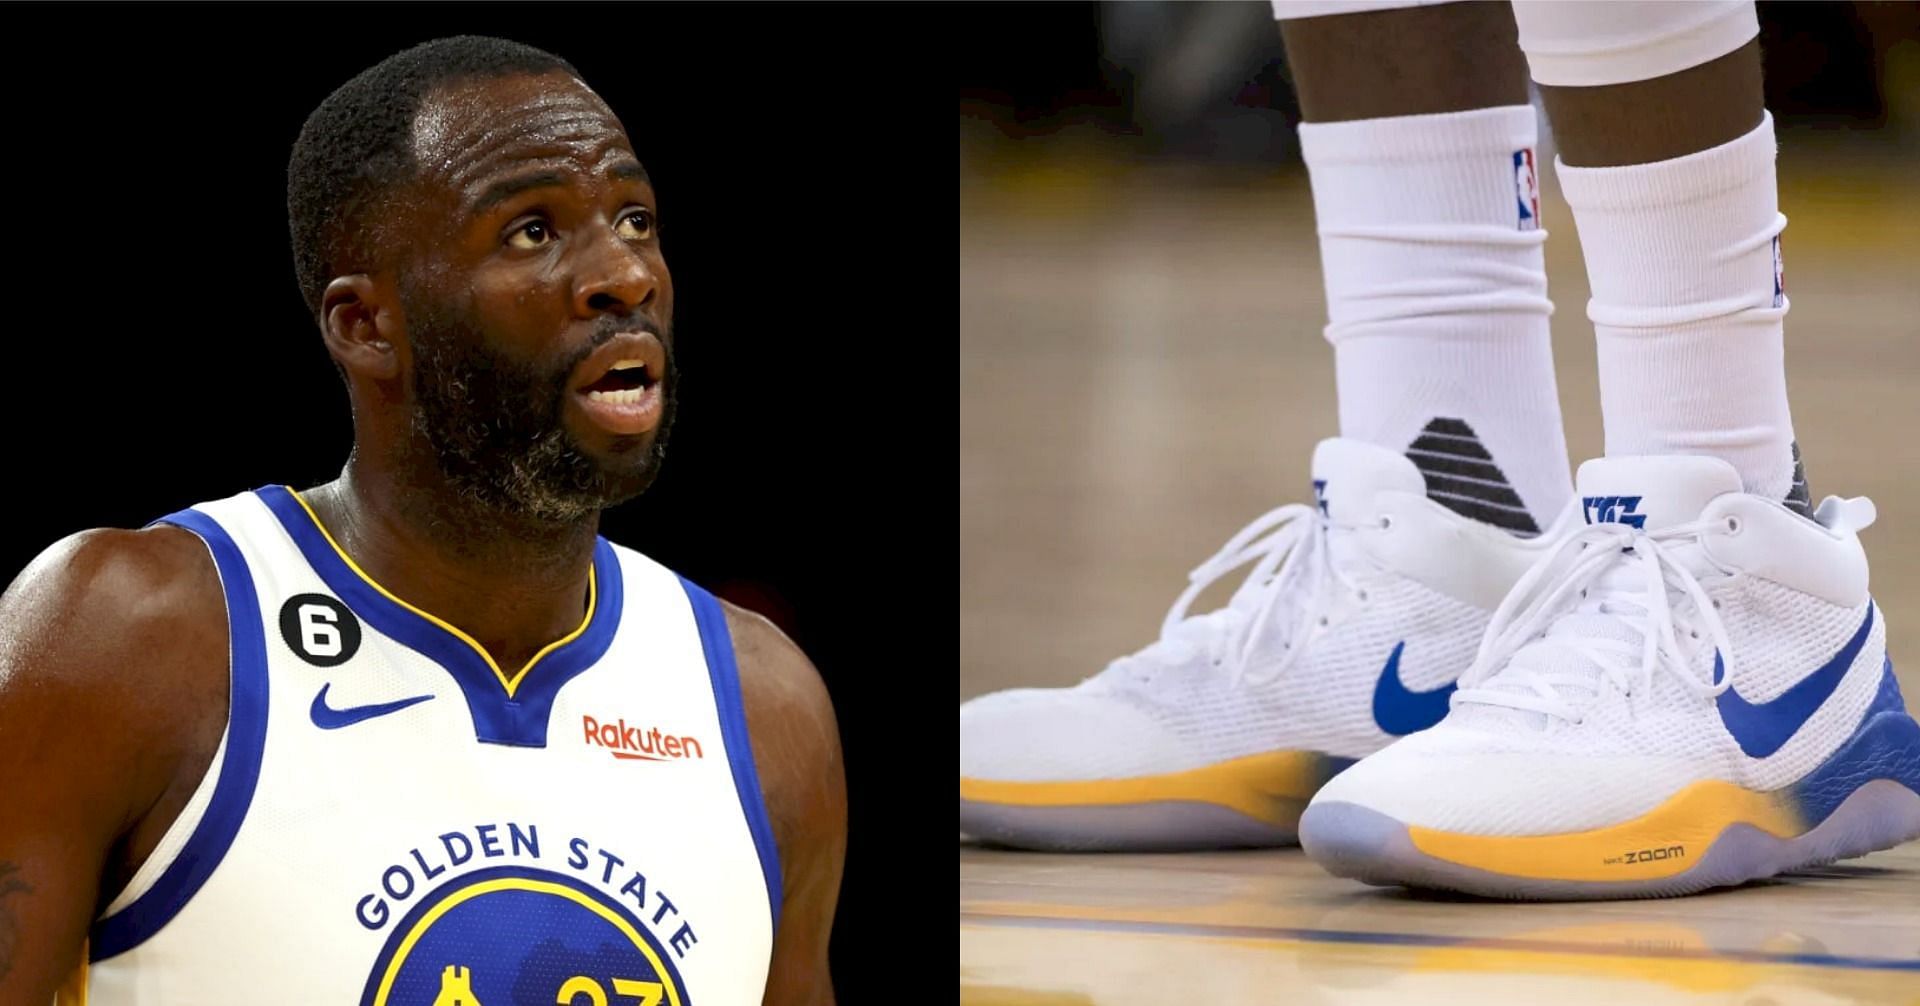 Is Draymond Green with Nike? Exploring his shoe contract details